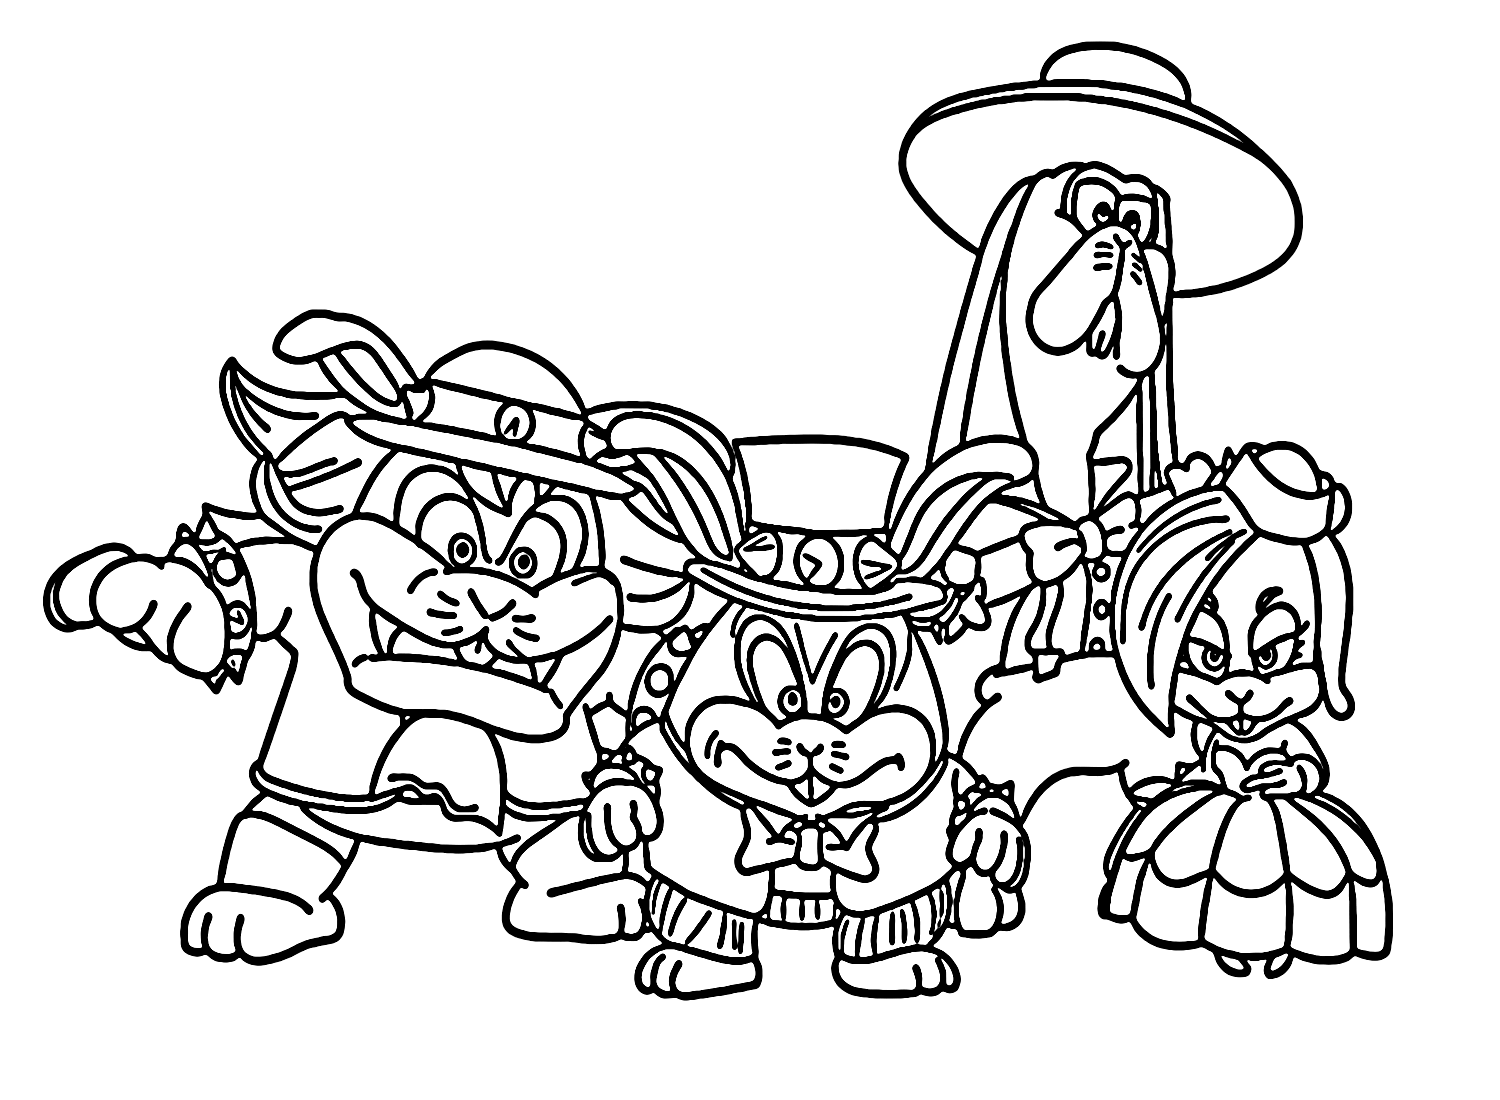 Super Mario Odyssey Images Coloring Page